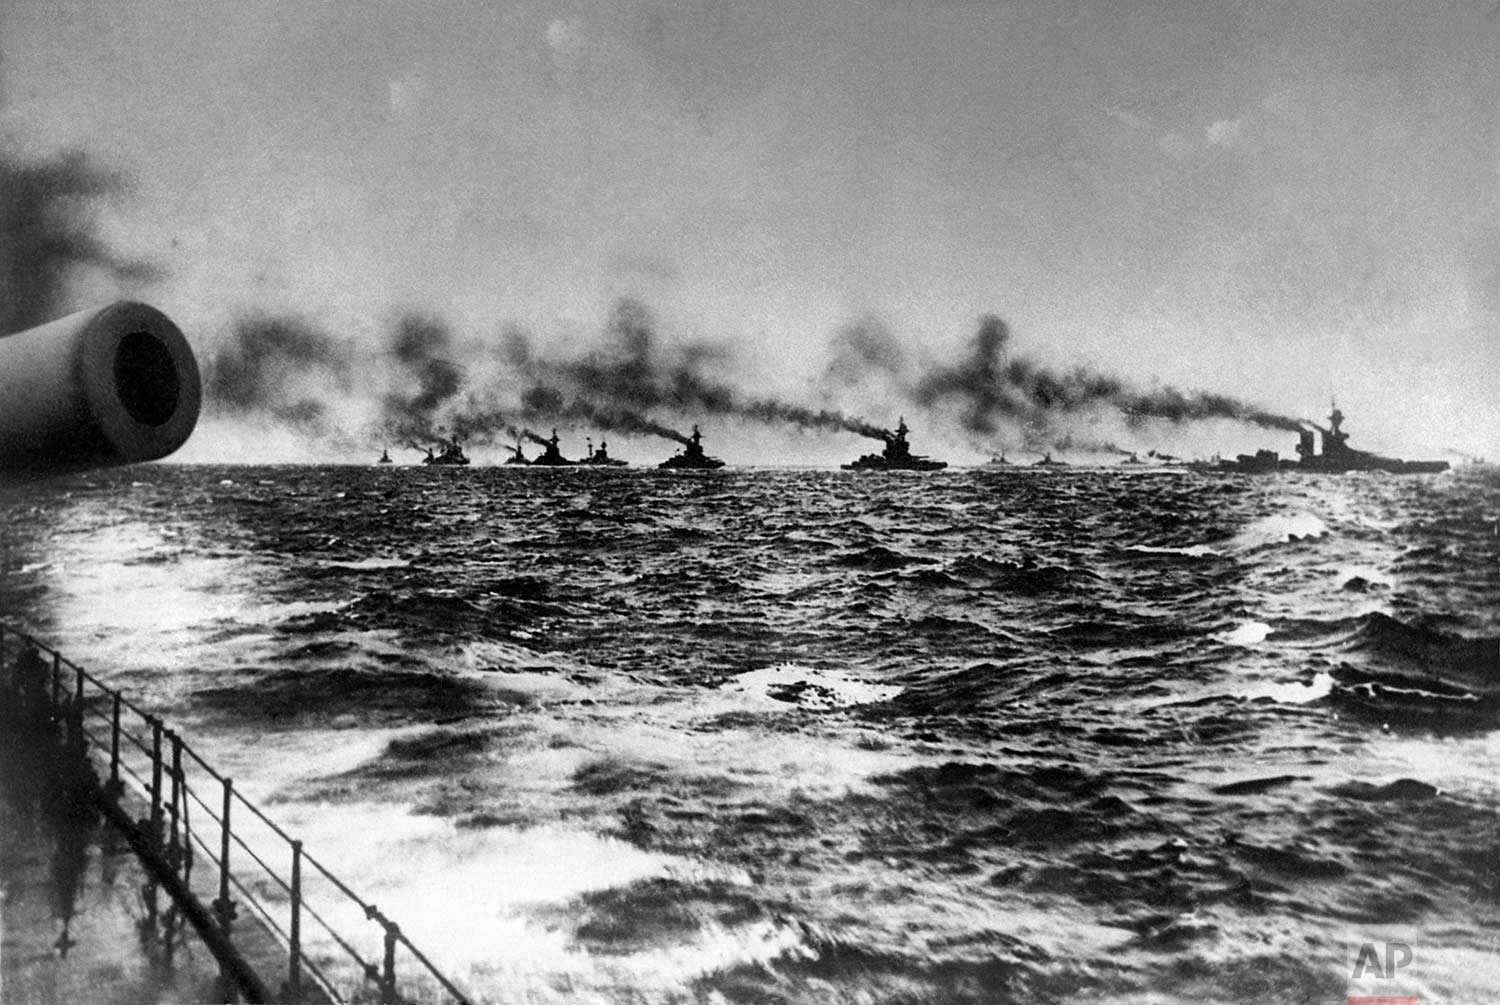  In this May 31,1916 photo, the British Grand Fleet under admiral John Jellicoe on their way to meet the Imperial German Navy's fleet for the Battle of Jutland in the North Sea. (AP Photo) 